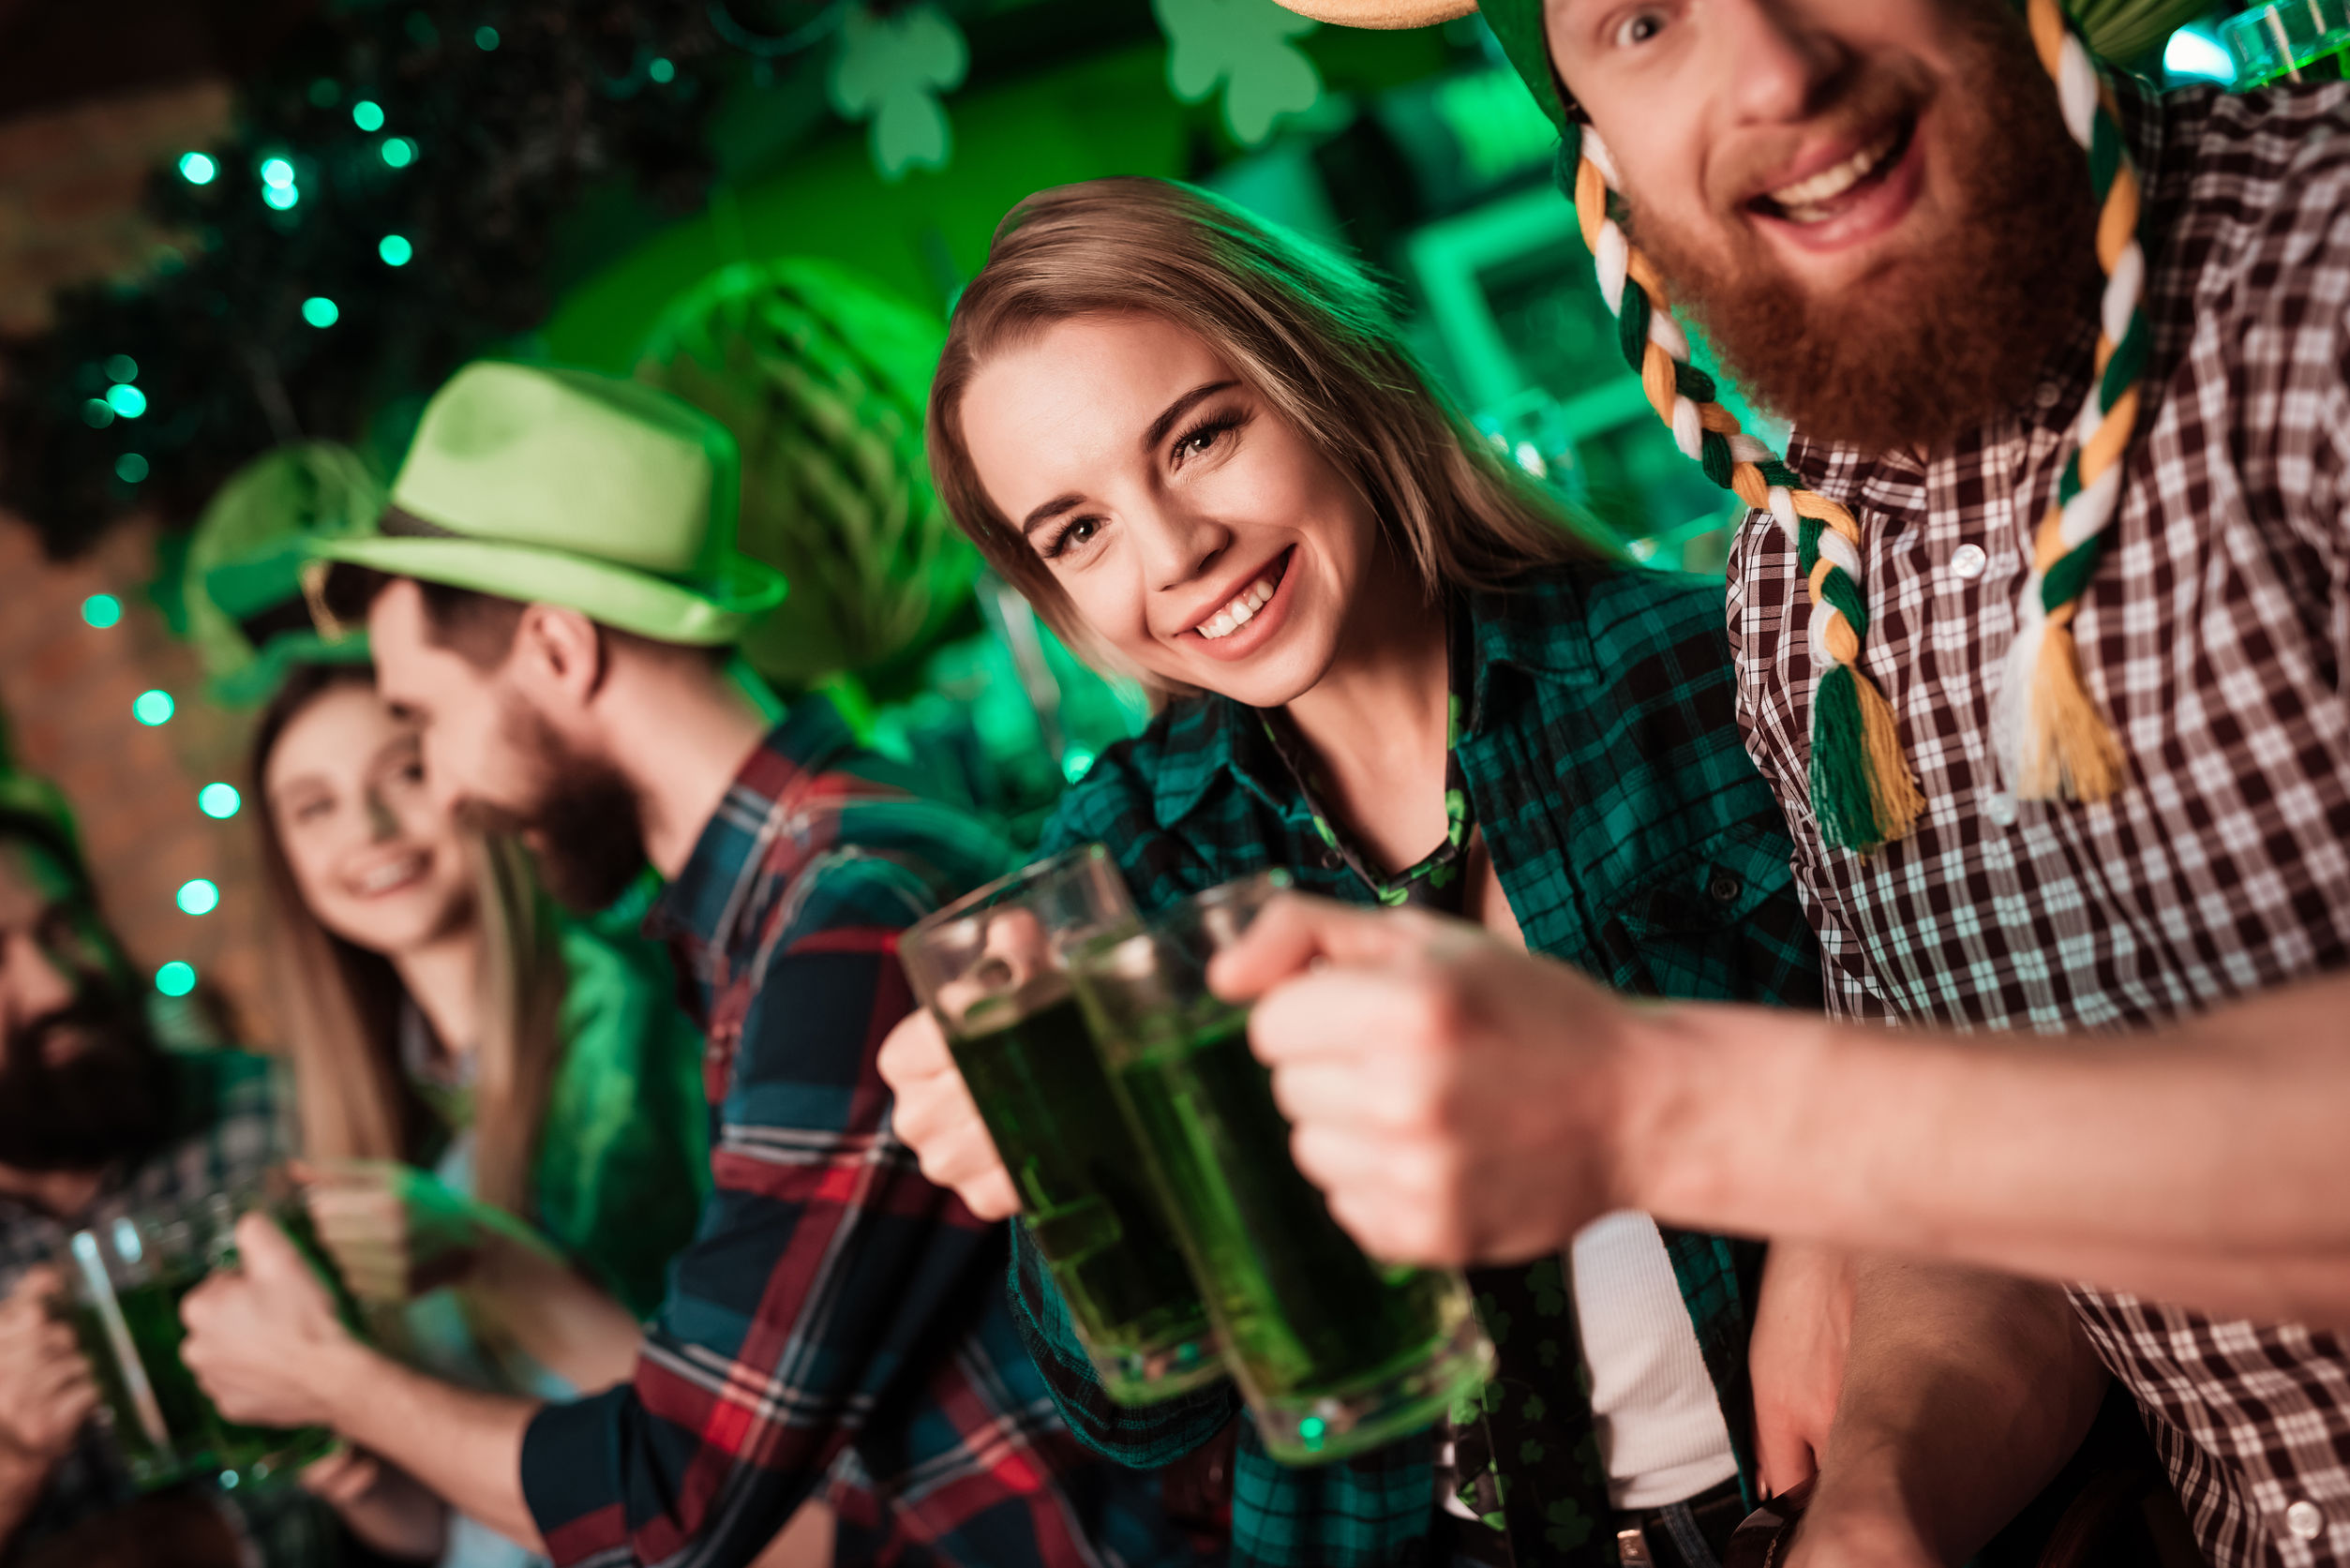 St. Paddy's Slip and Fall Injury? How Floridians Can Fight Back